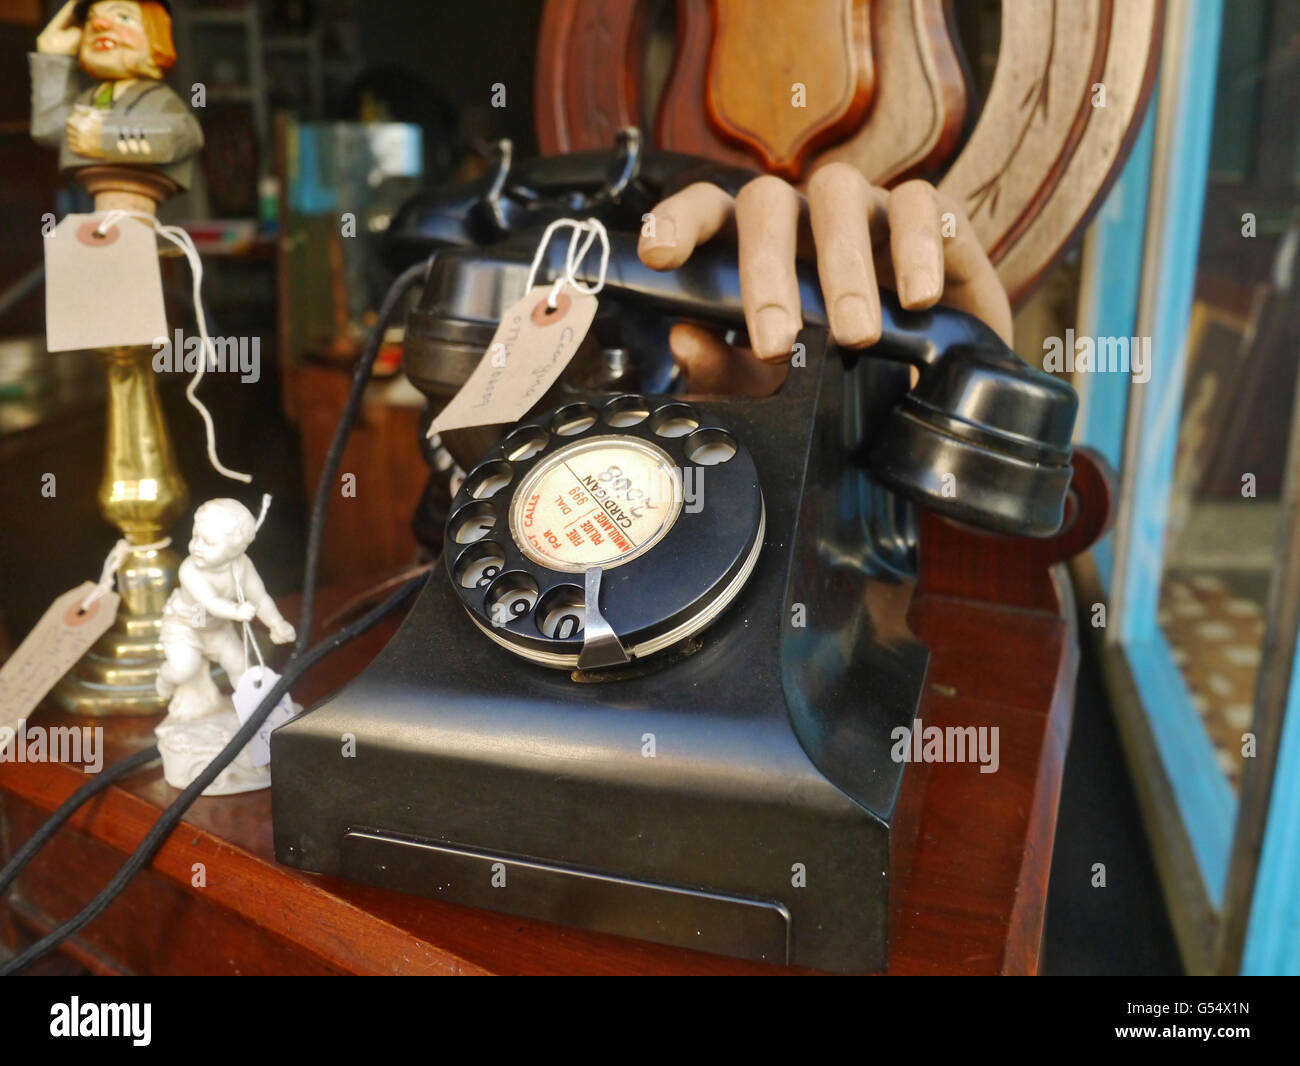 Old fashioned telephone with shop dummy hand antique shop window Stock Photo